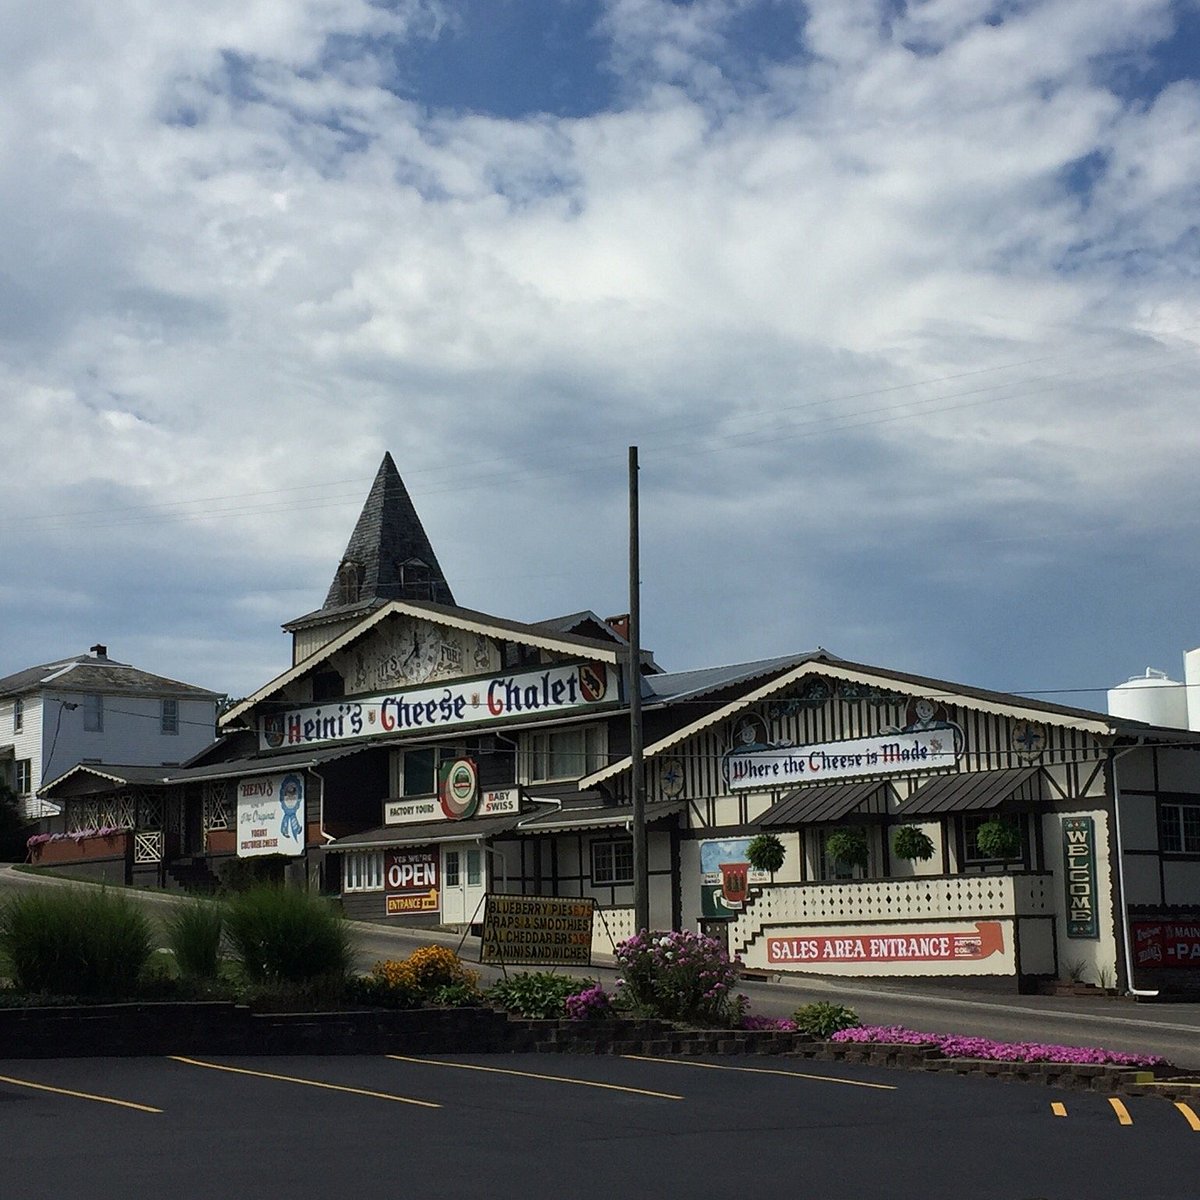 The Cheese House: A Gigantic Cheese Store In Pennsylvania